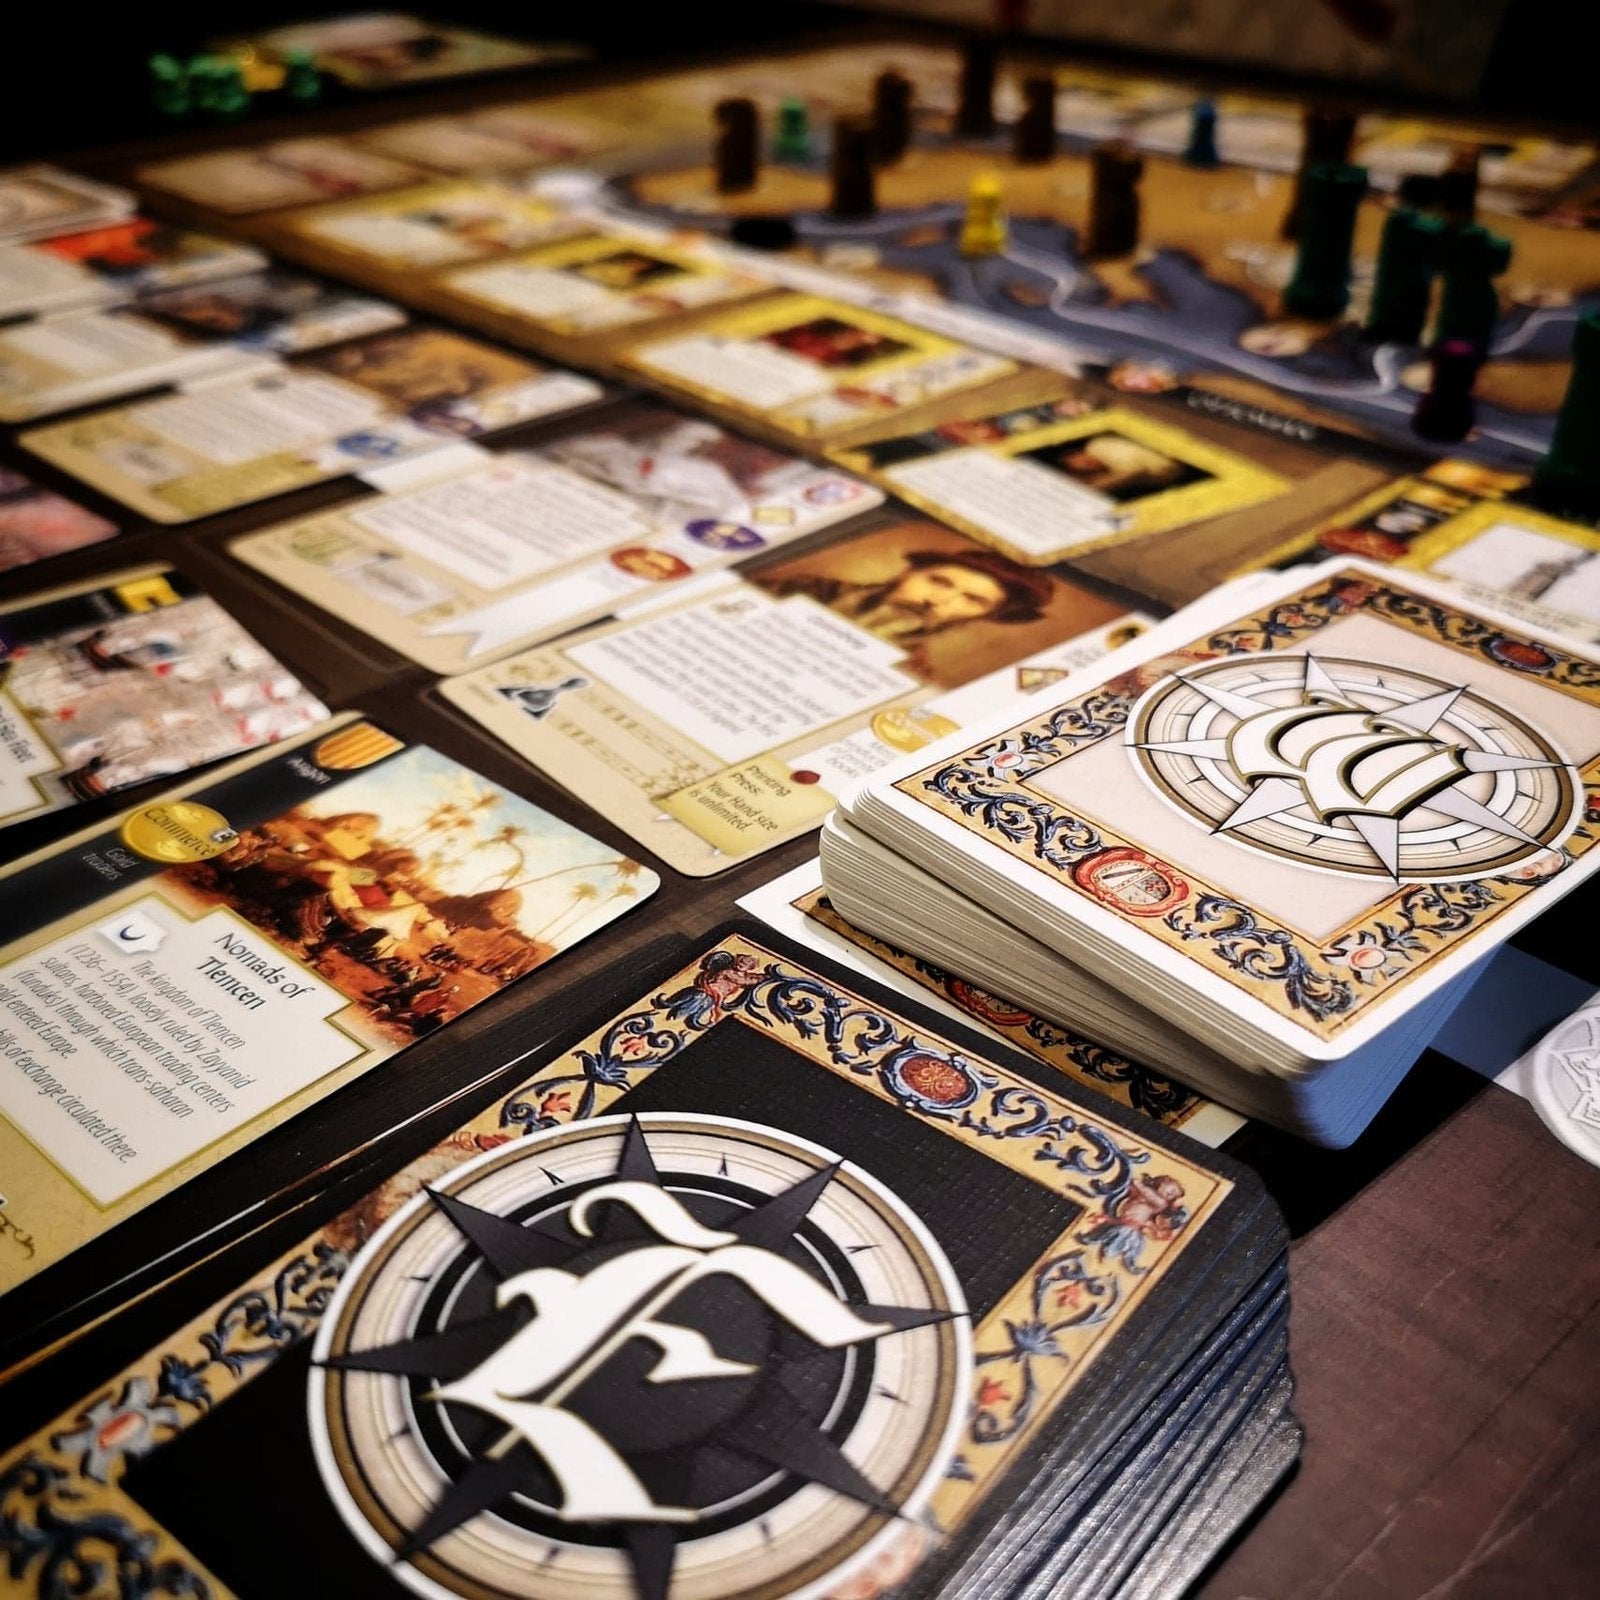 PAX Renaissance Board Game (2nd Edition) - Expanded view of the cards and board during game play